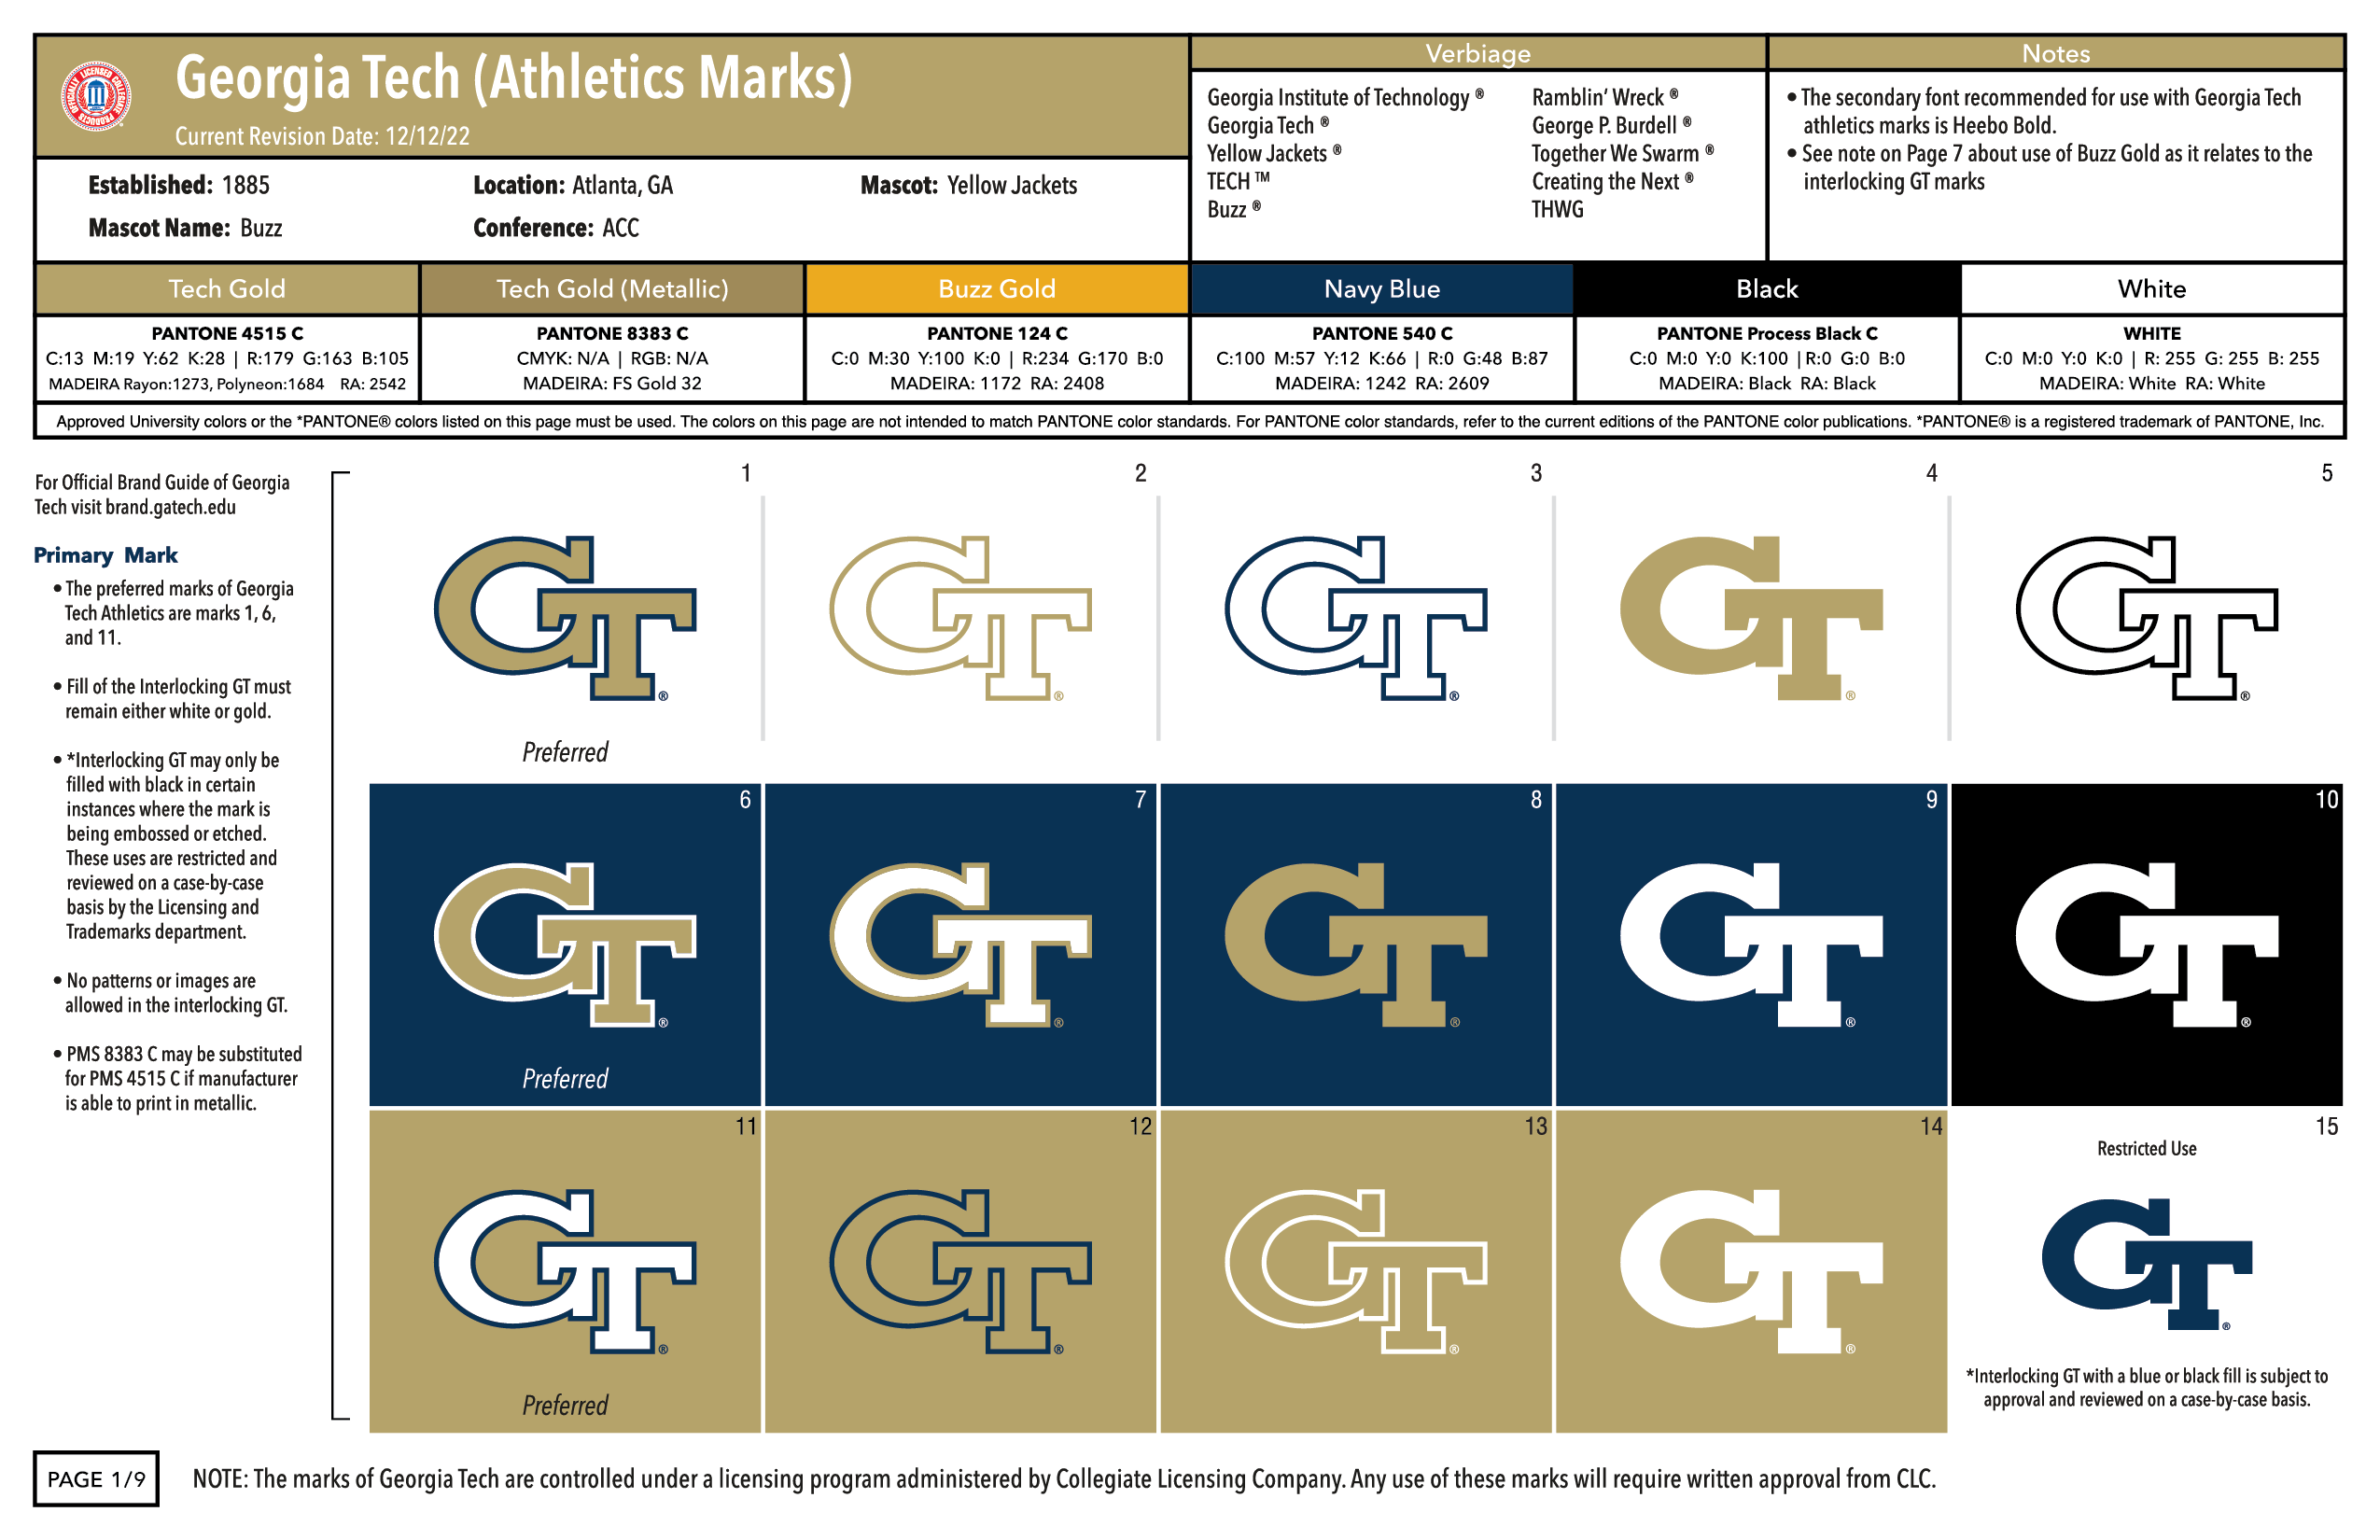 Athletic marks on the 1st page of the Georgia Tech logo artsheet 